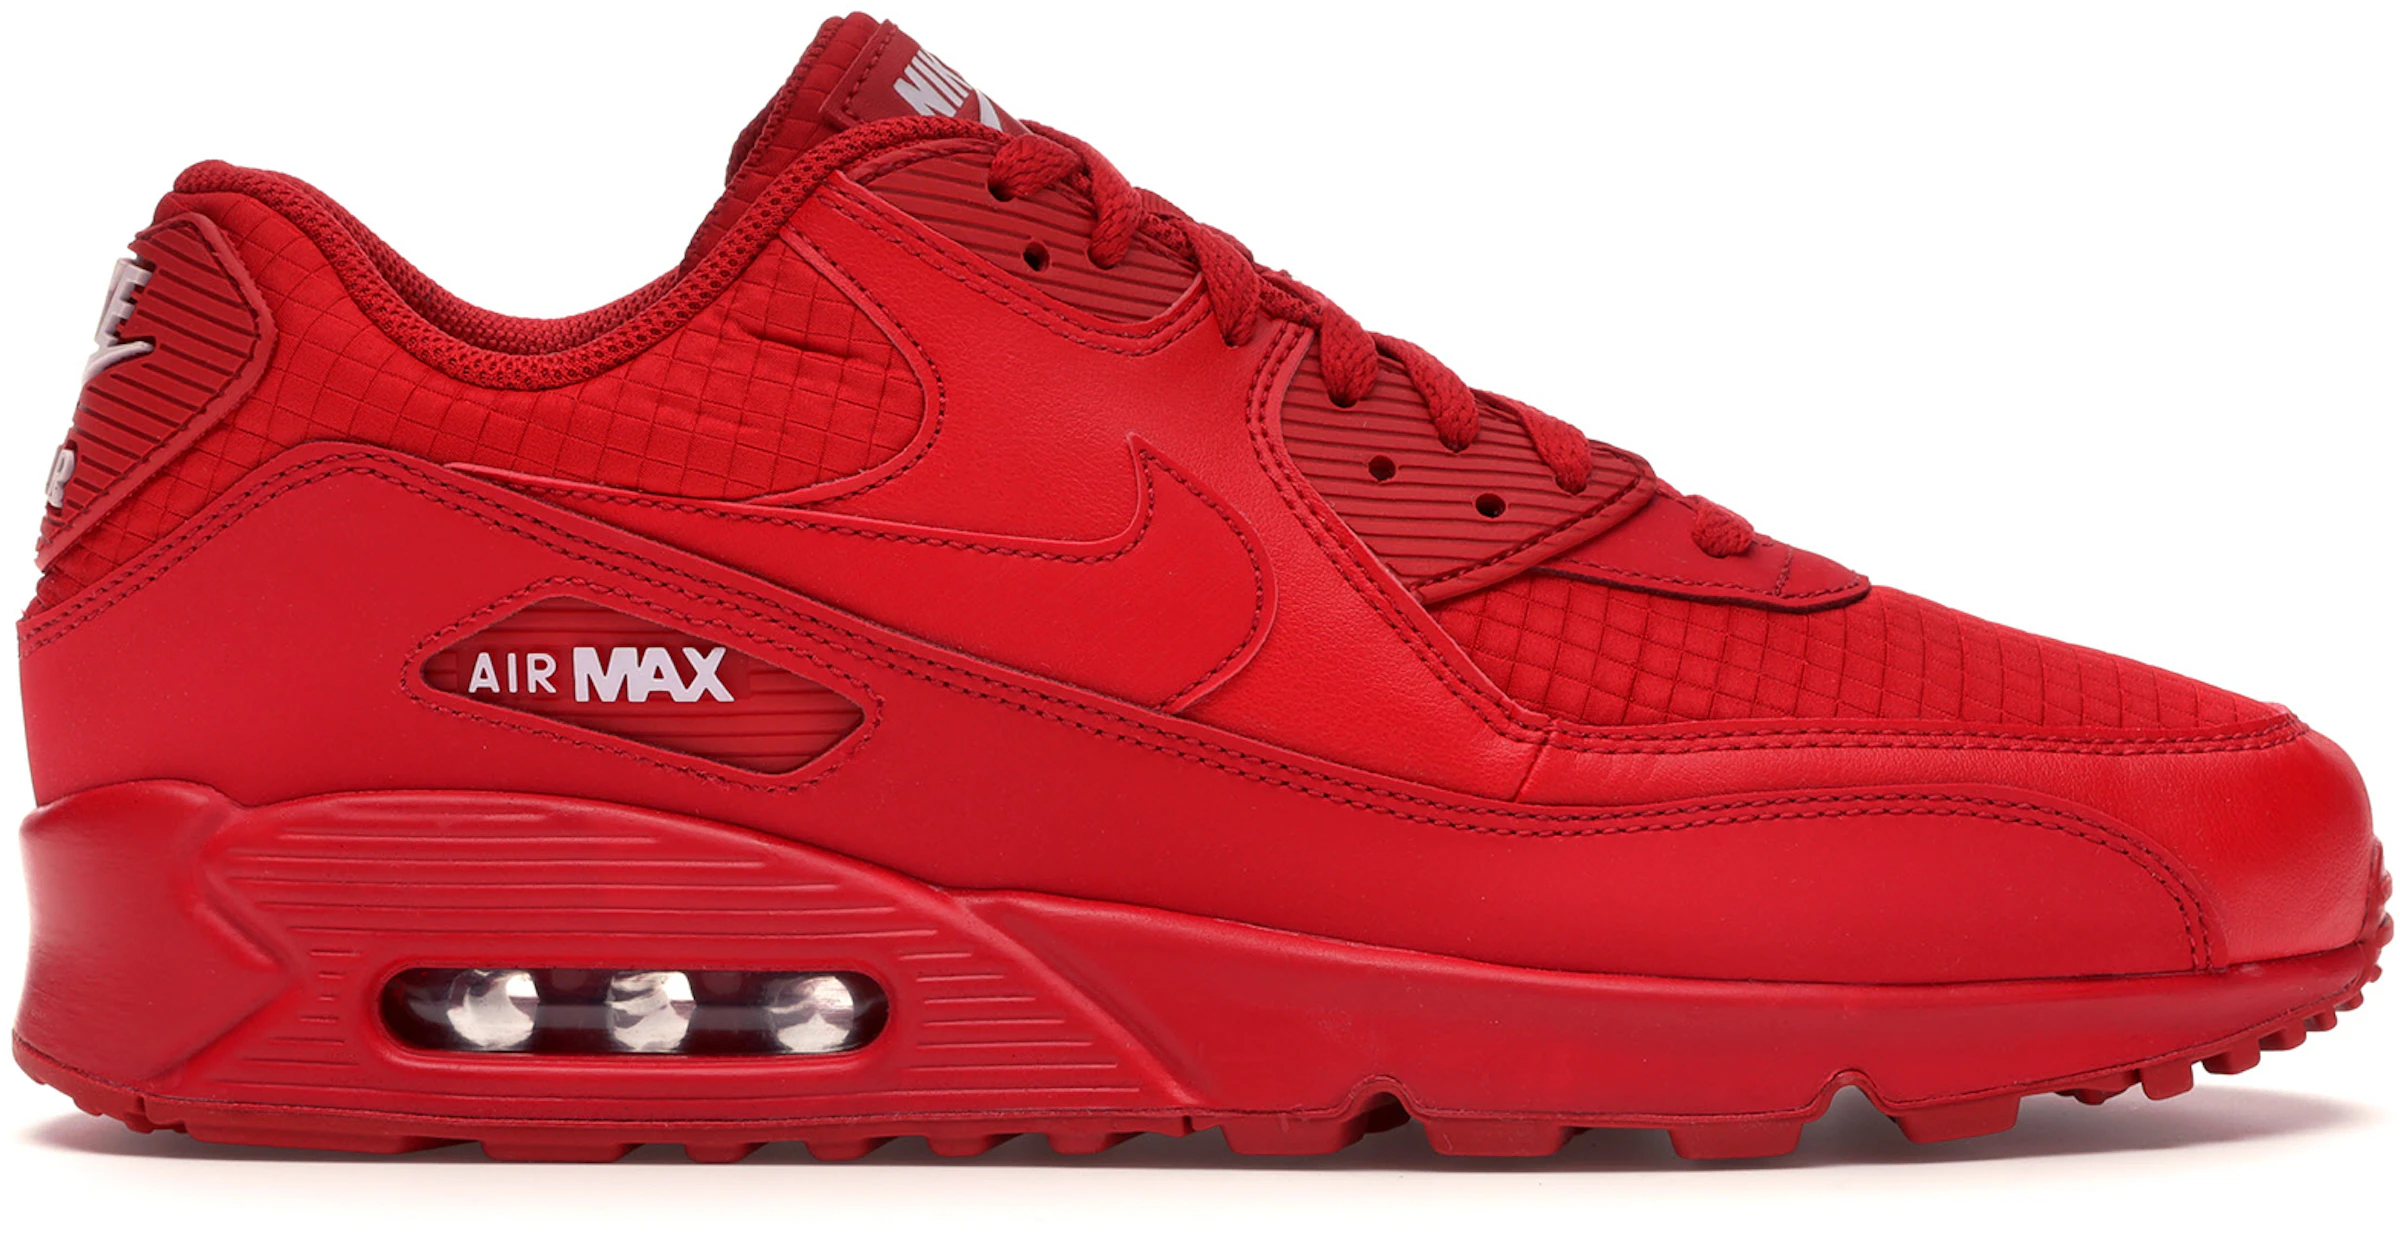 Nike Air Max Triple Red | vlr.eng.br